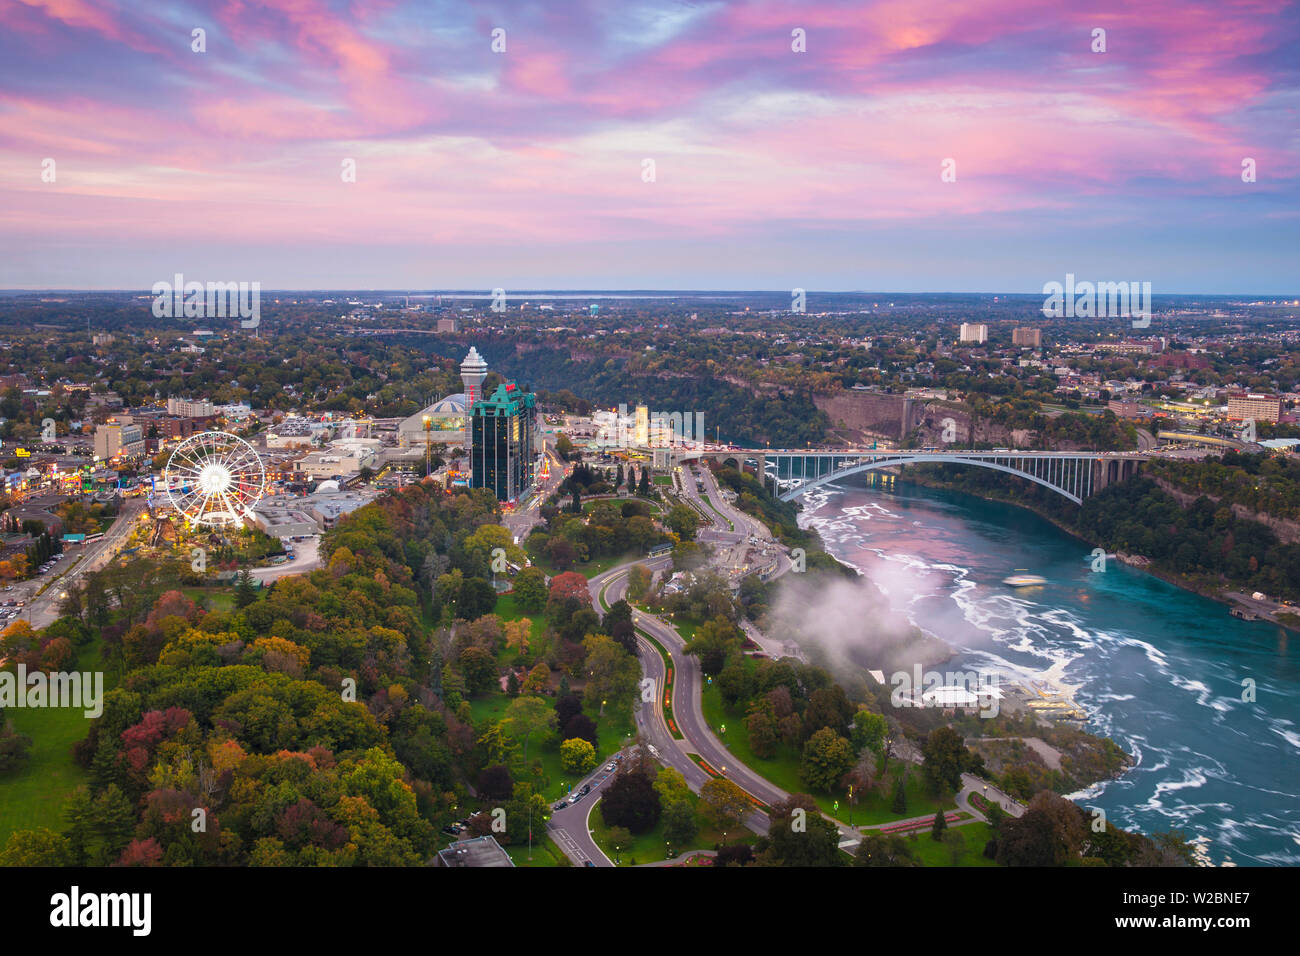 Canada and USA, Ontario and New York State, Niagara, View over Victoria Park towards the Sheraton on the Falls Hotel and Rainbow Bridge Stock Photo